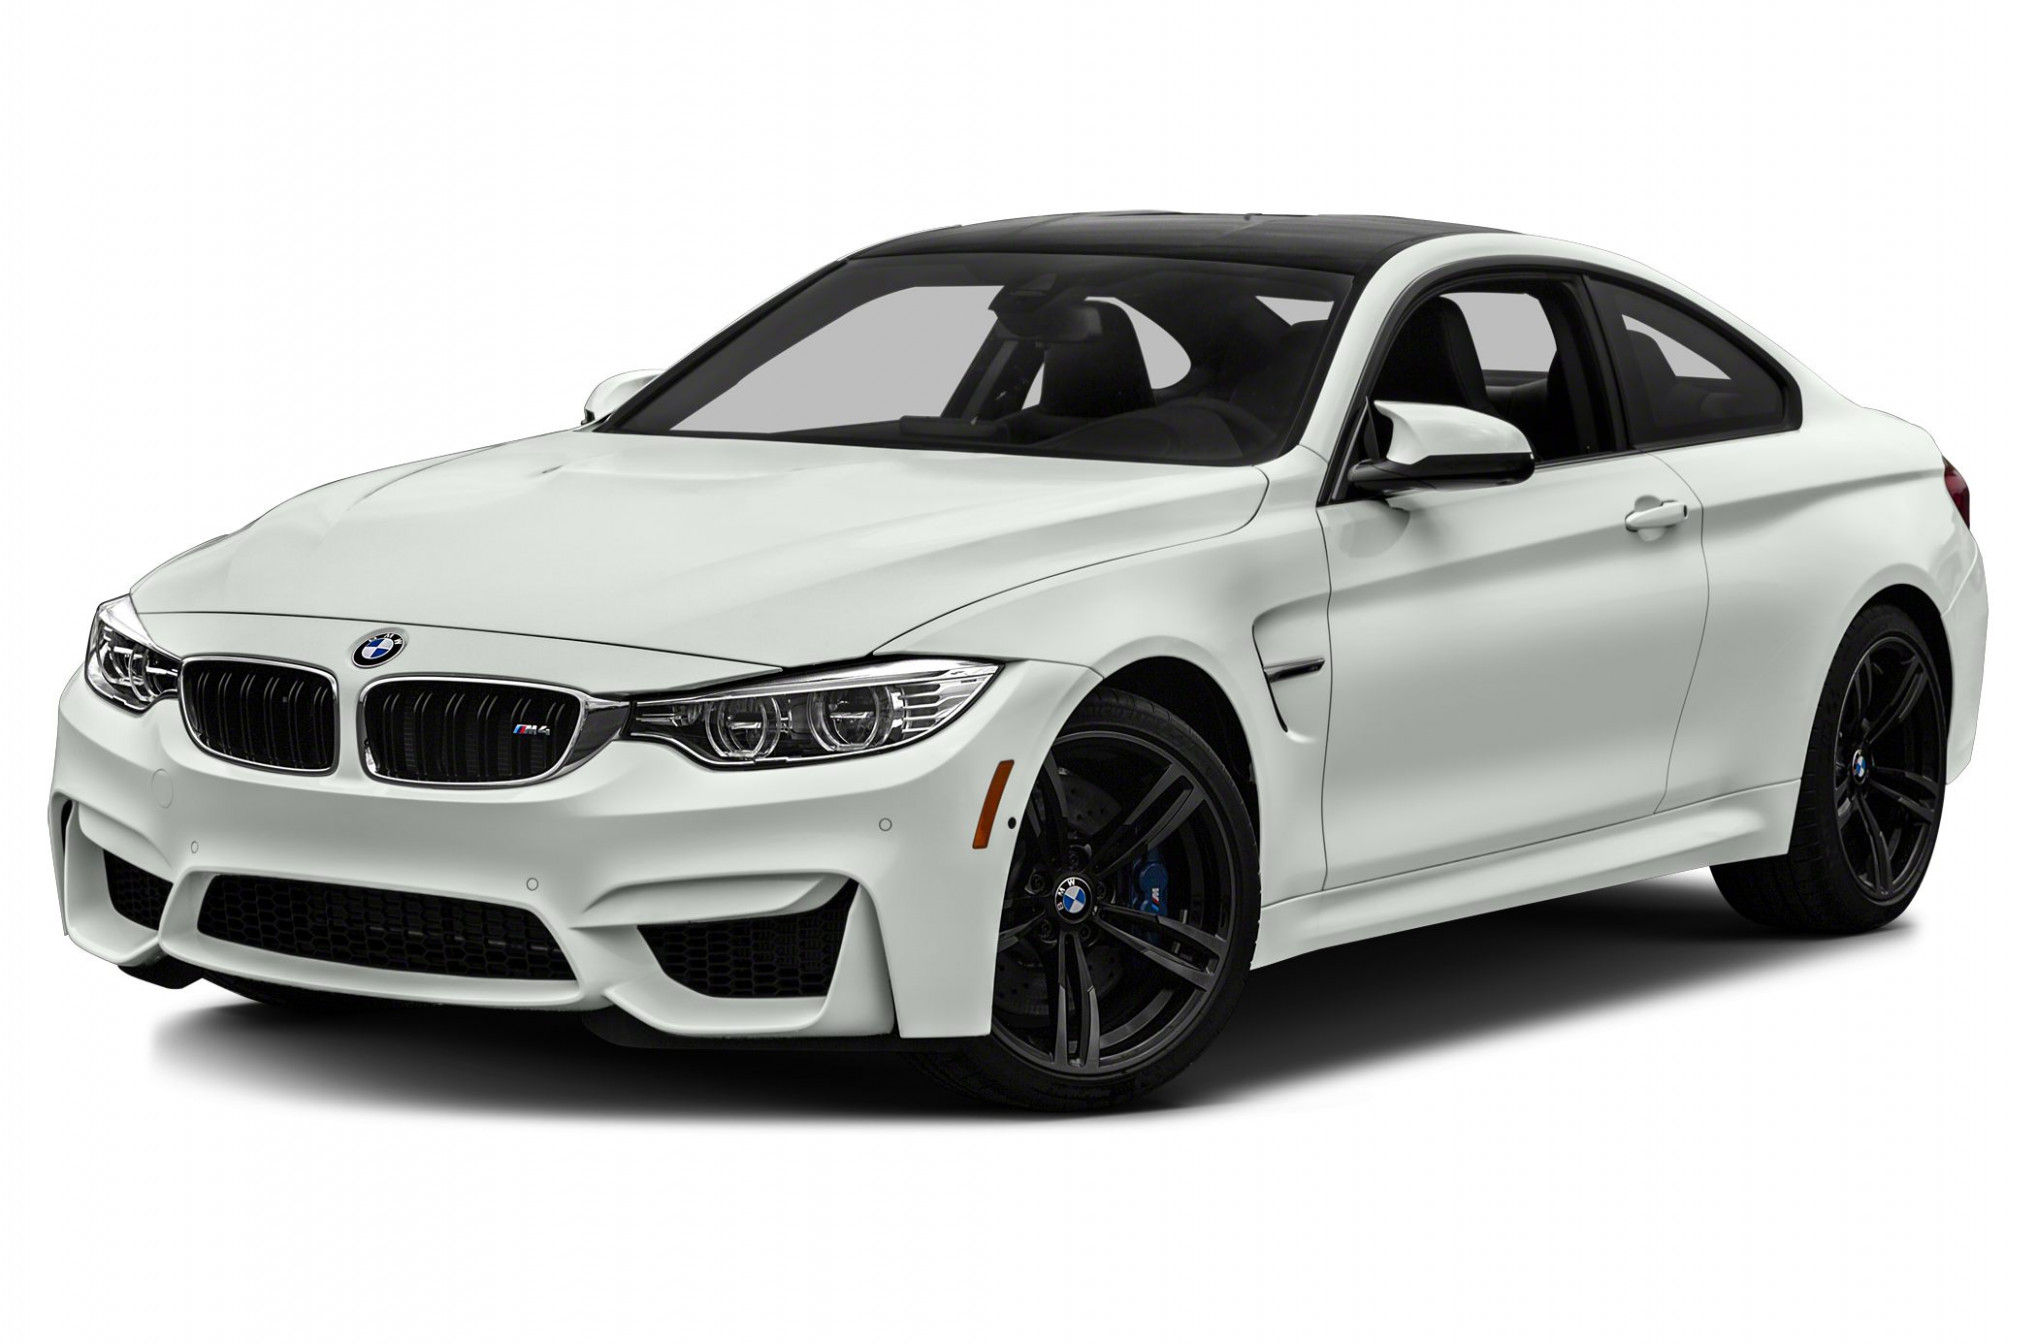 Pricing how much is bmw m4